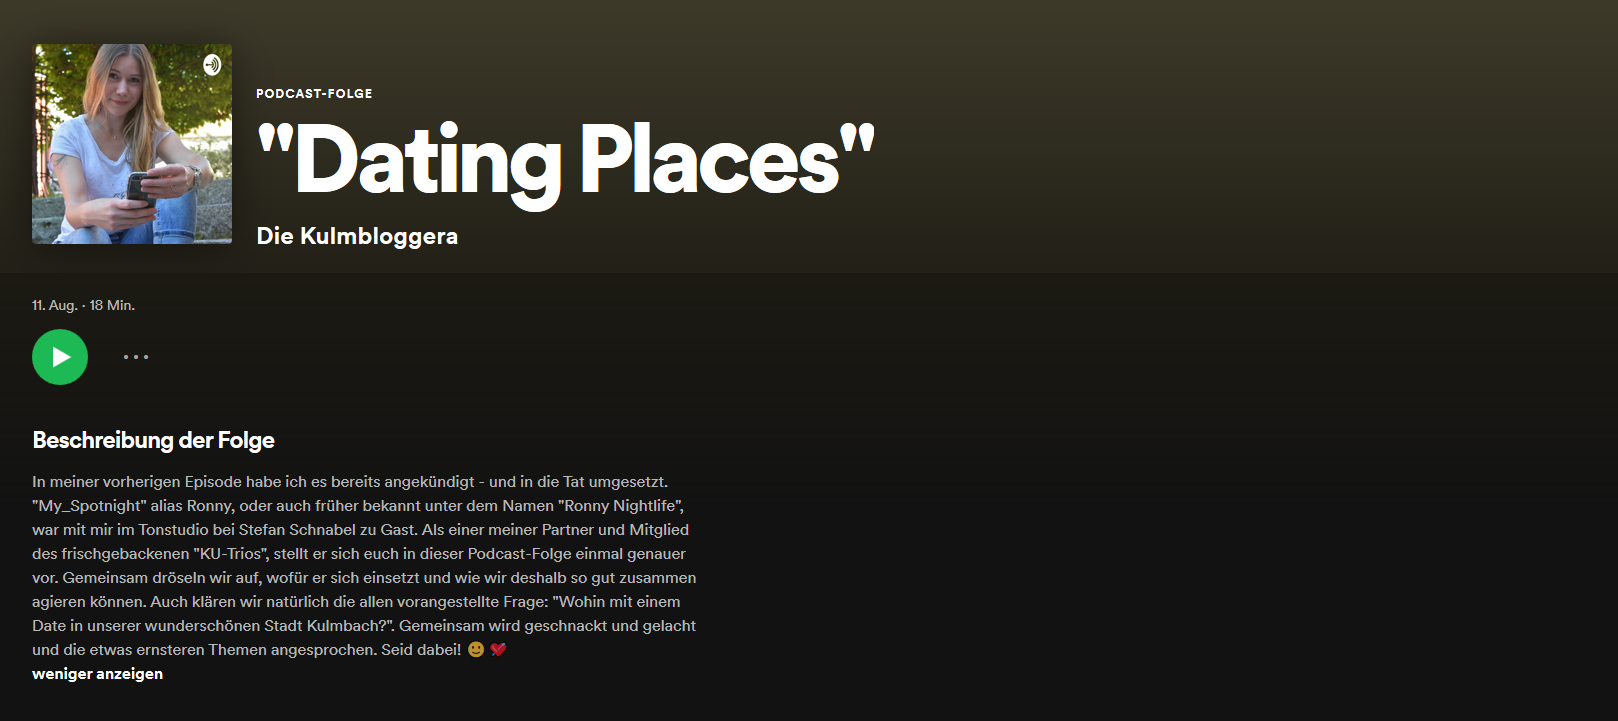 "Dating Places"